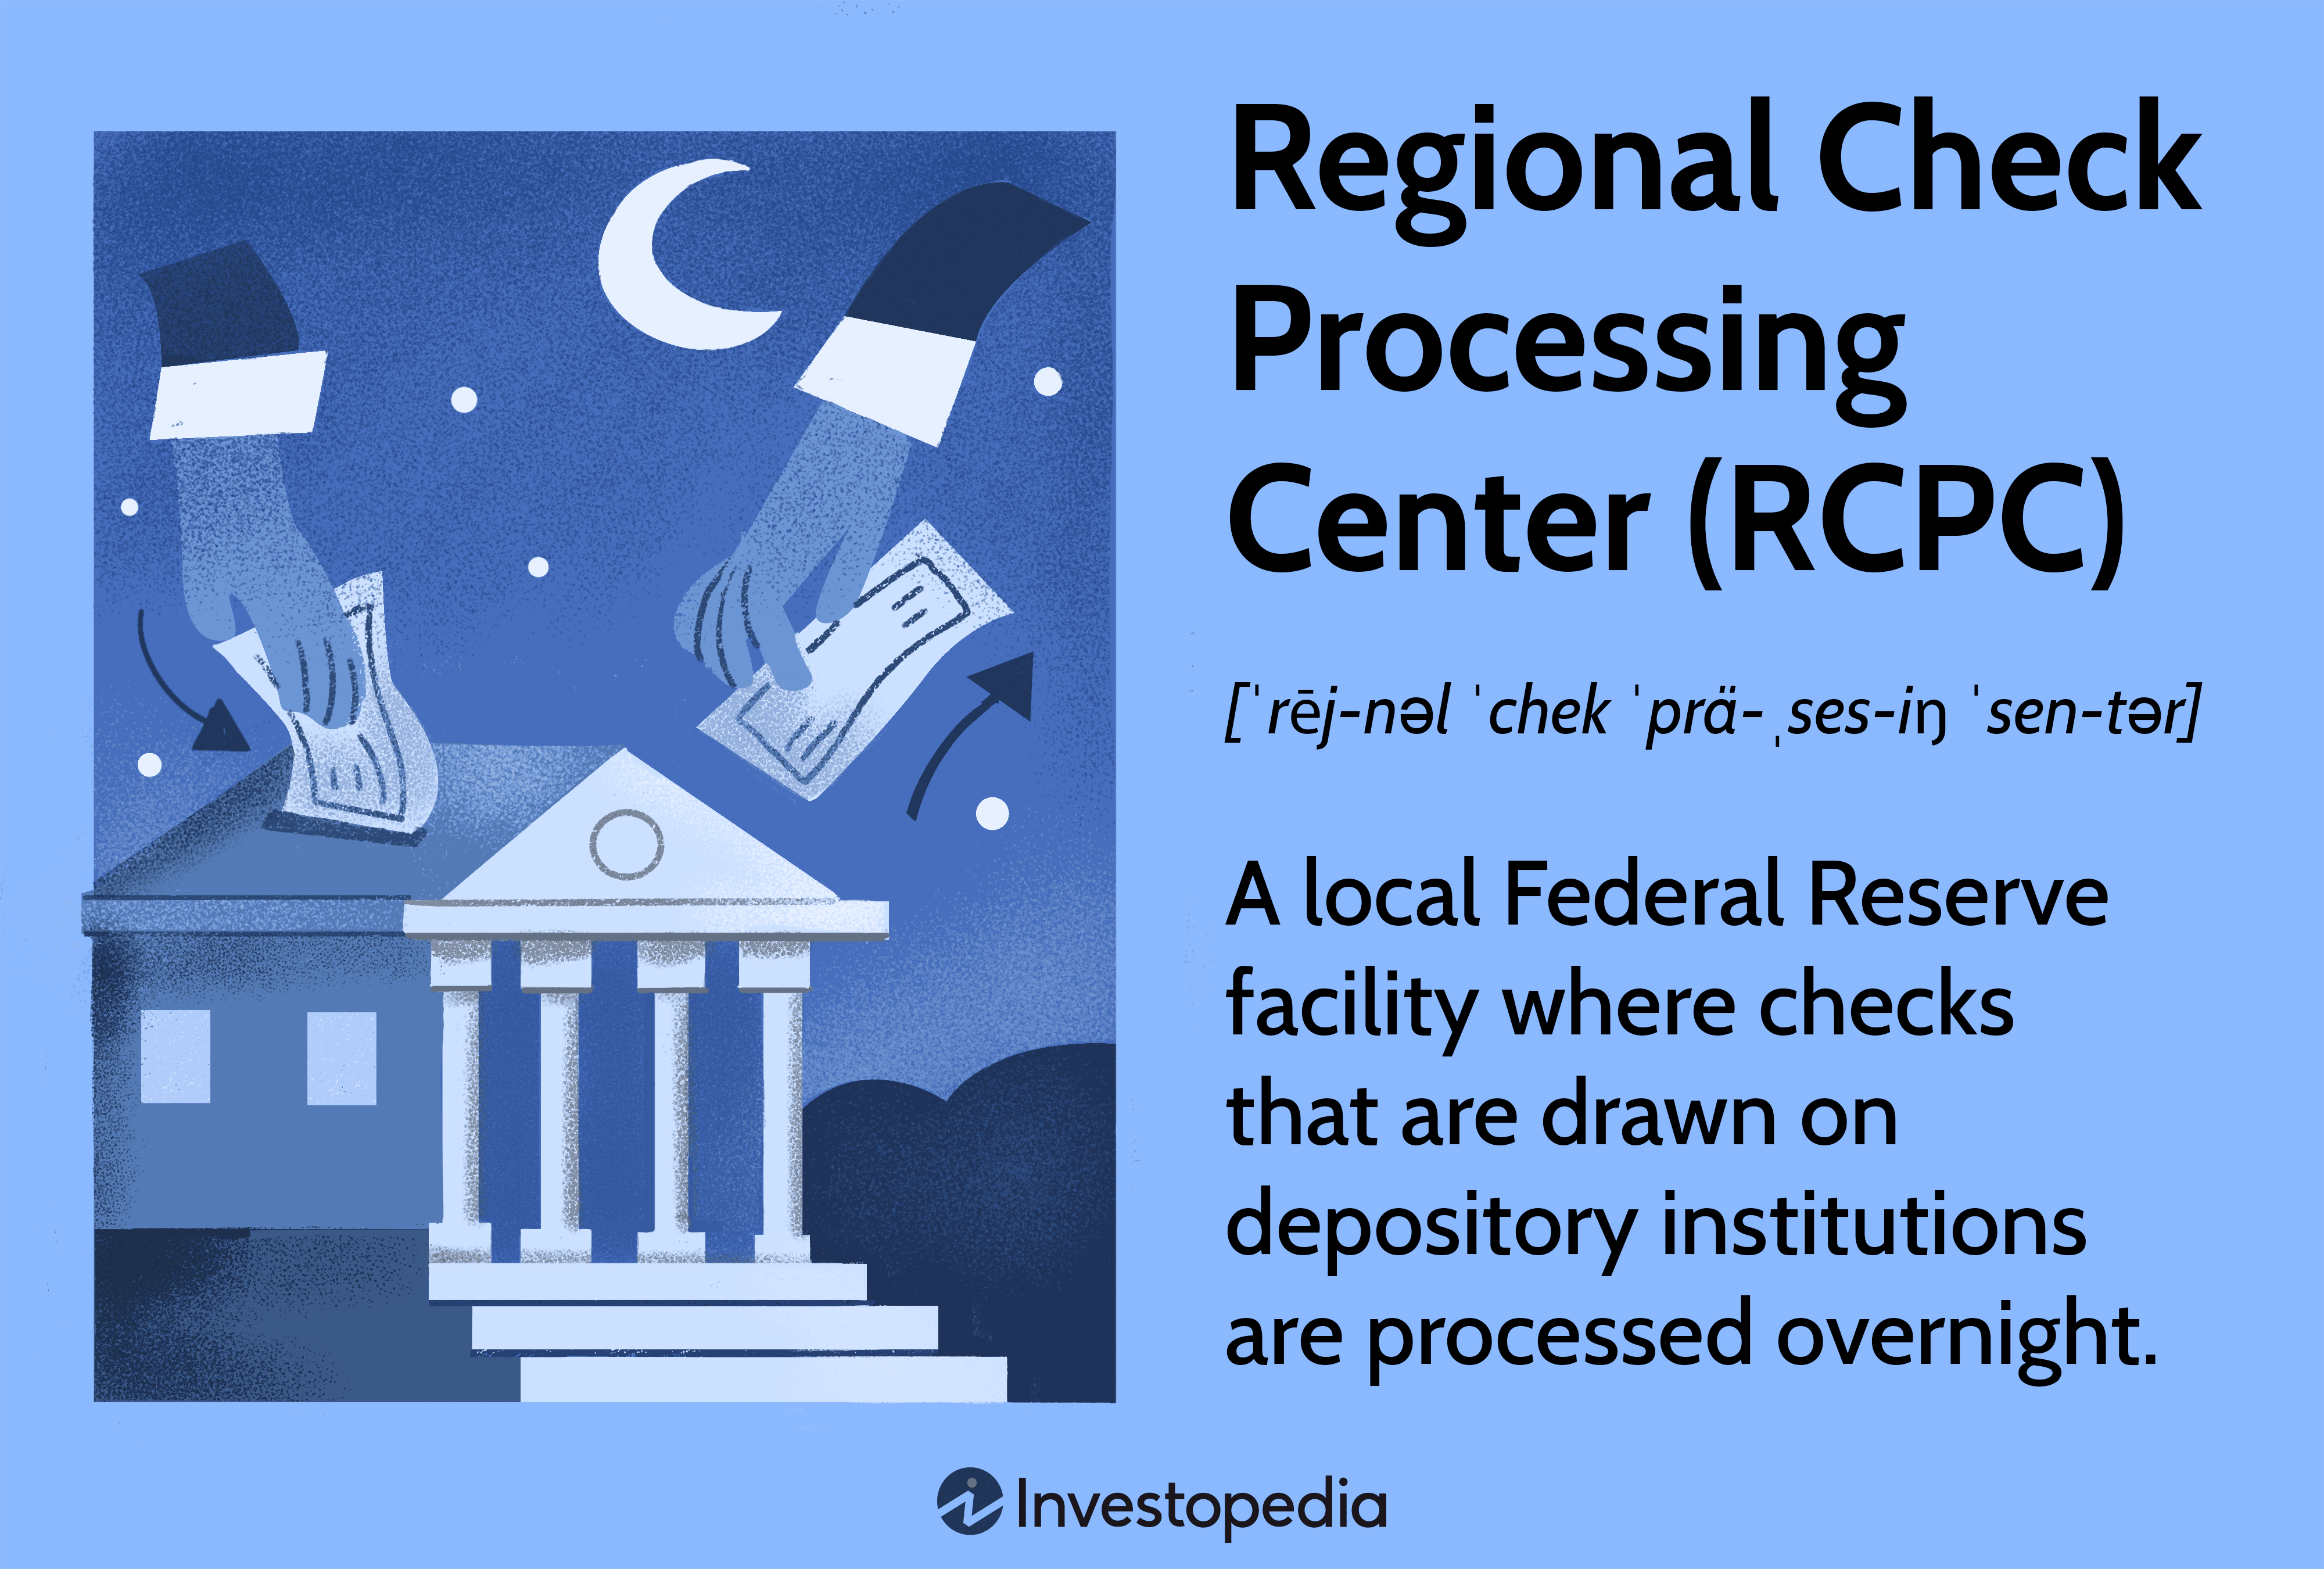 REGIONAL Check Processing Center (RCPC): A local Federal Reserve facility where checks that are drawn on depository institutions are processed overnight.